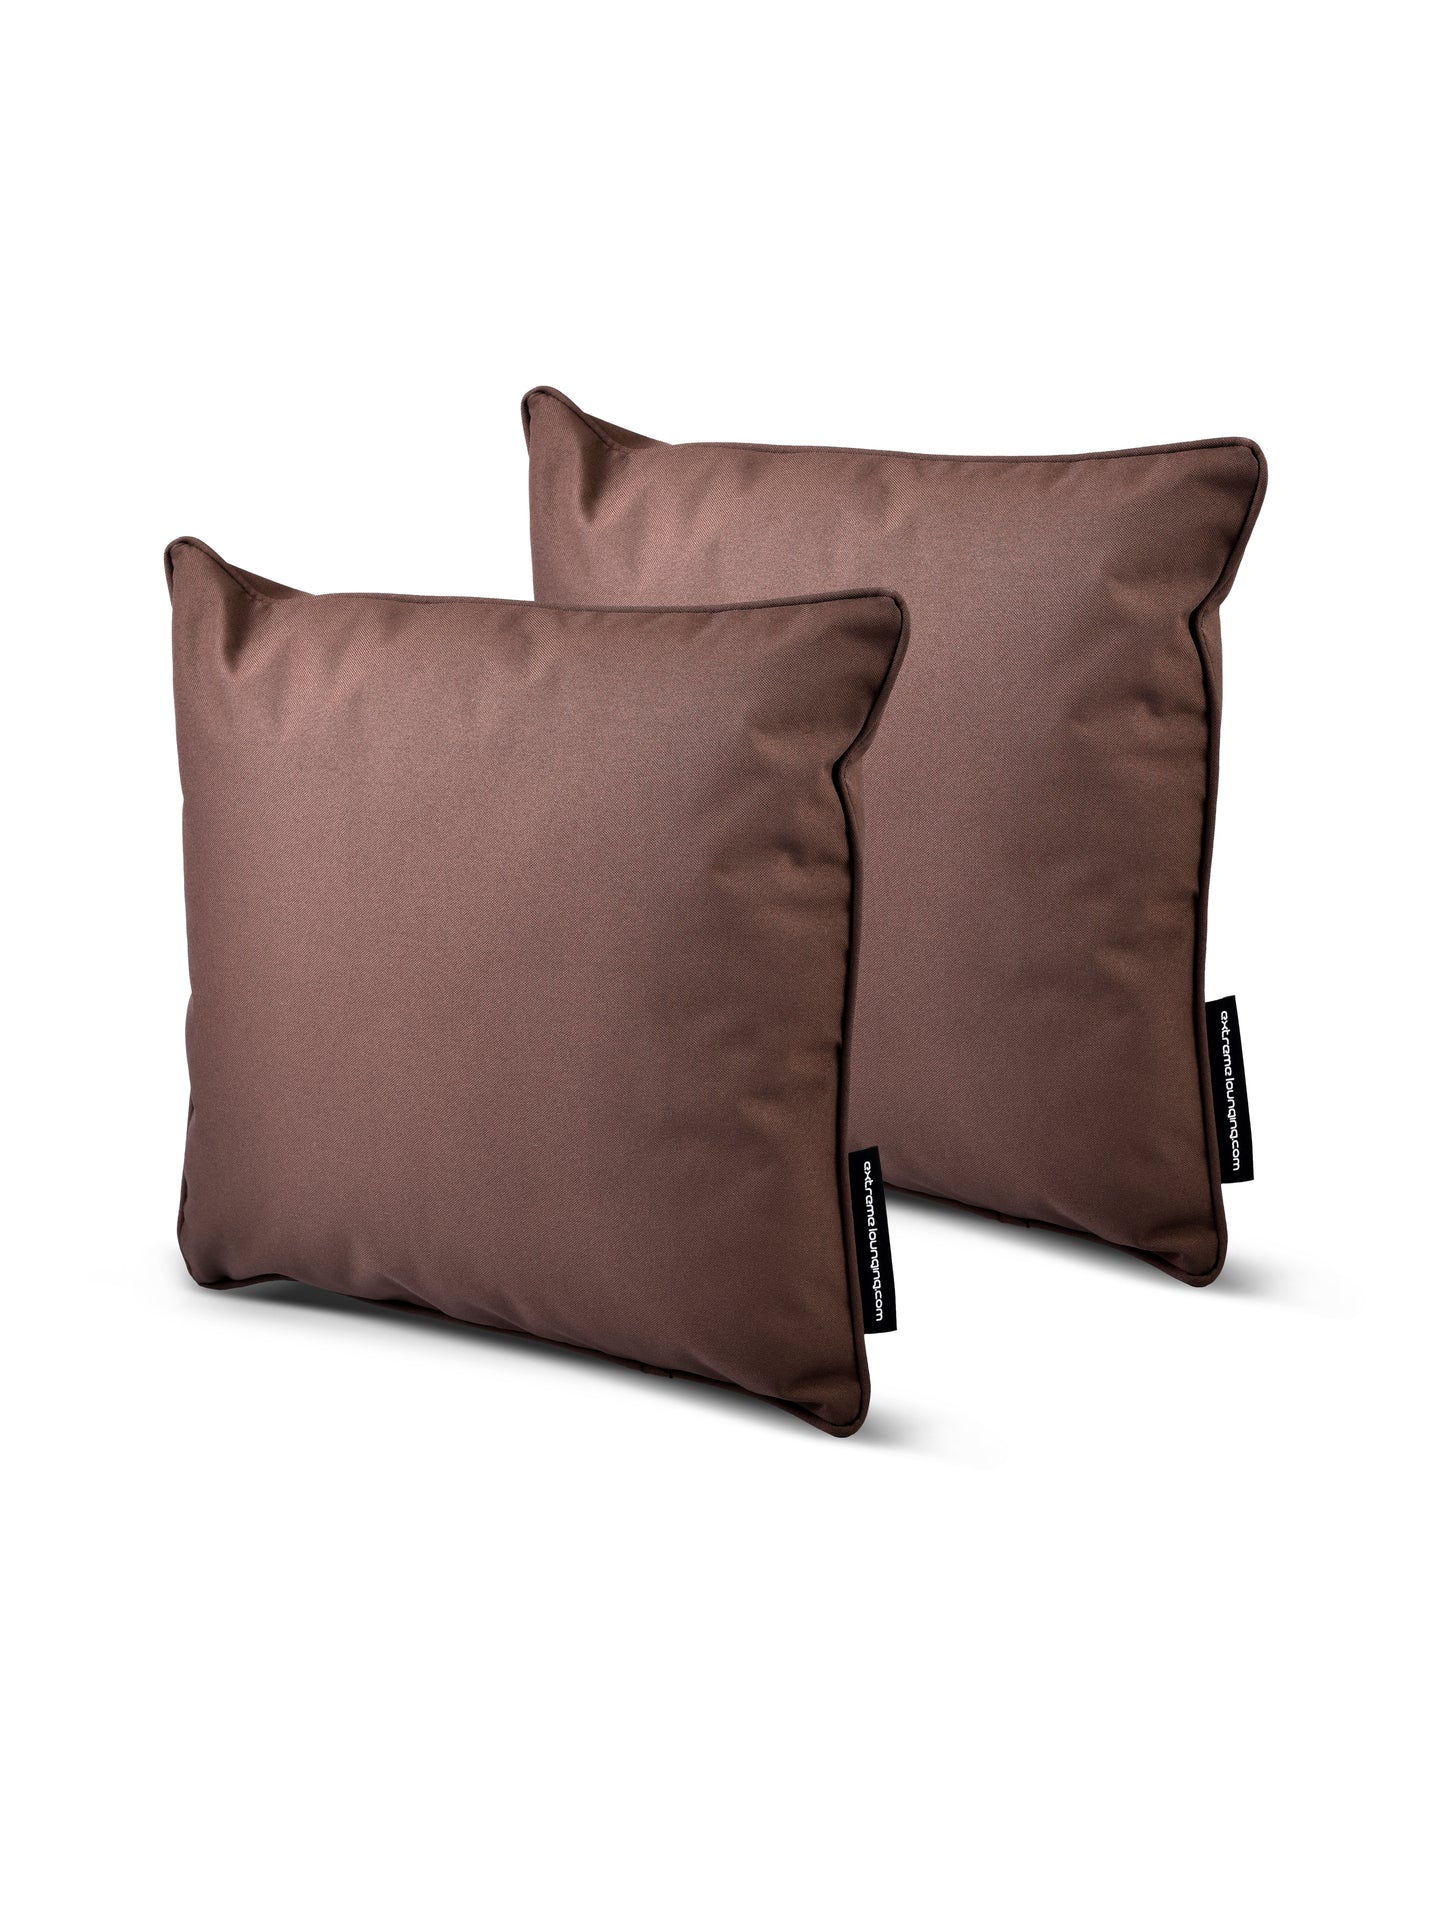 Two brown rectangular pillows from the B Cushion Twin Pack Brights Collection by Brisks, crafted from breathable polyester, are arranged slightly overlapping each other against a white background. Each pillow features a black tag with white text on its side. The pillows appear soft and plush, designed for comfort and support.